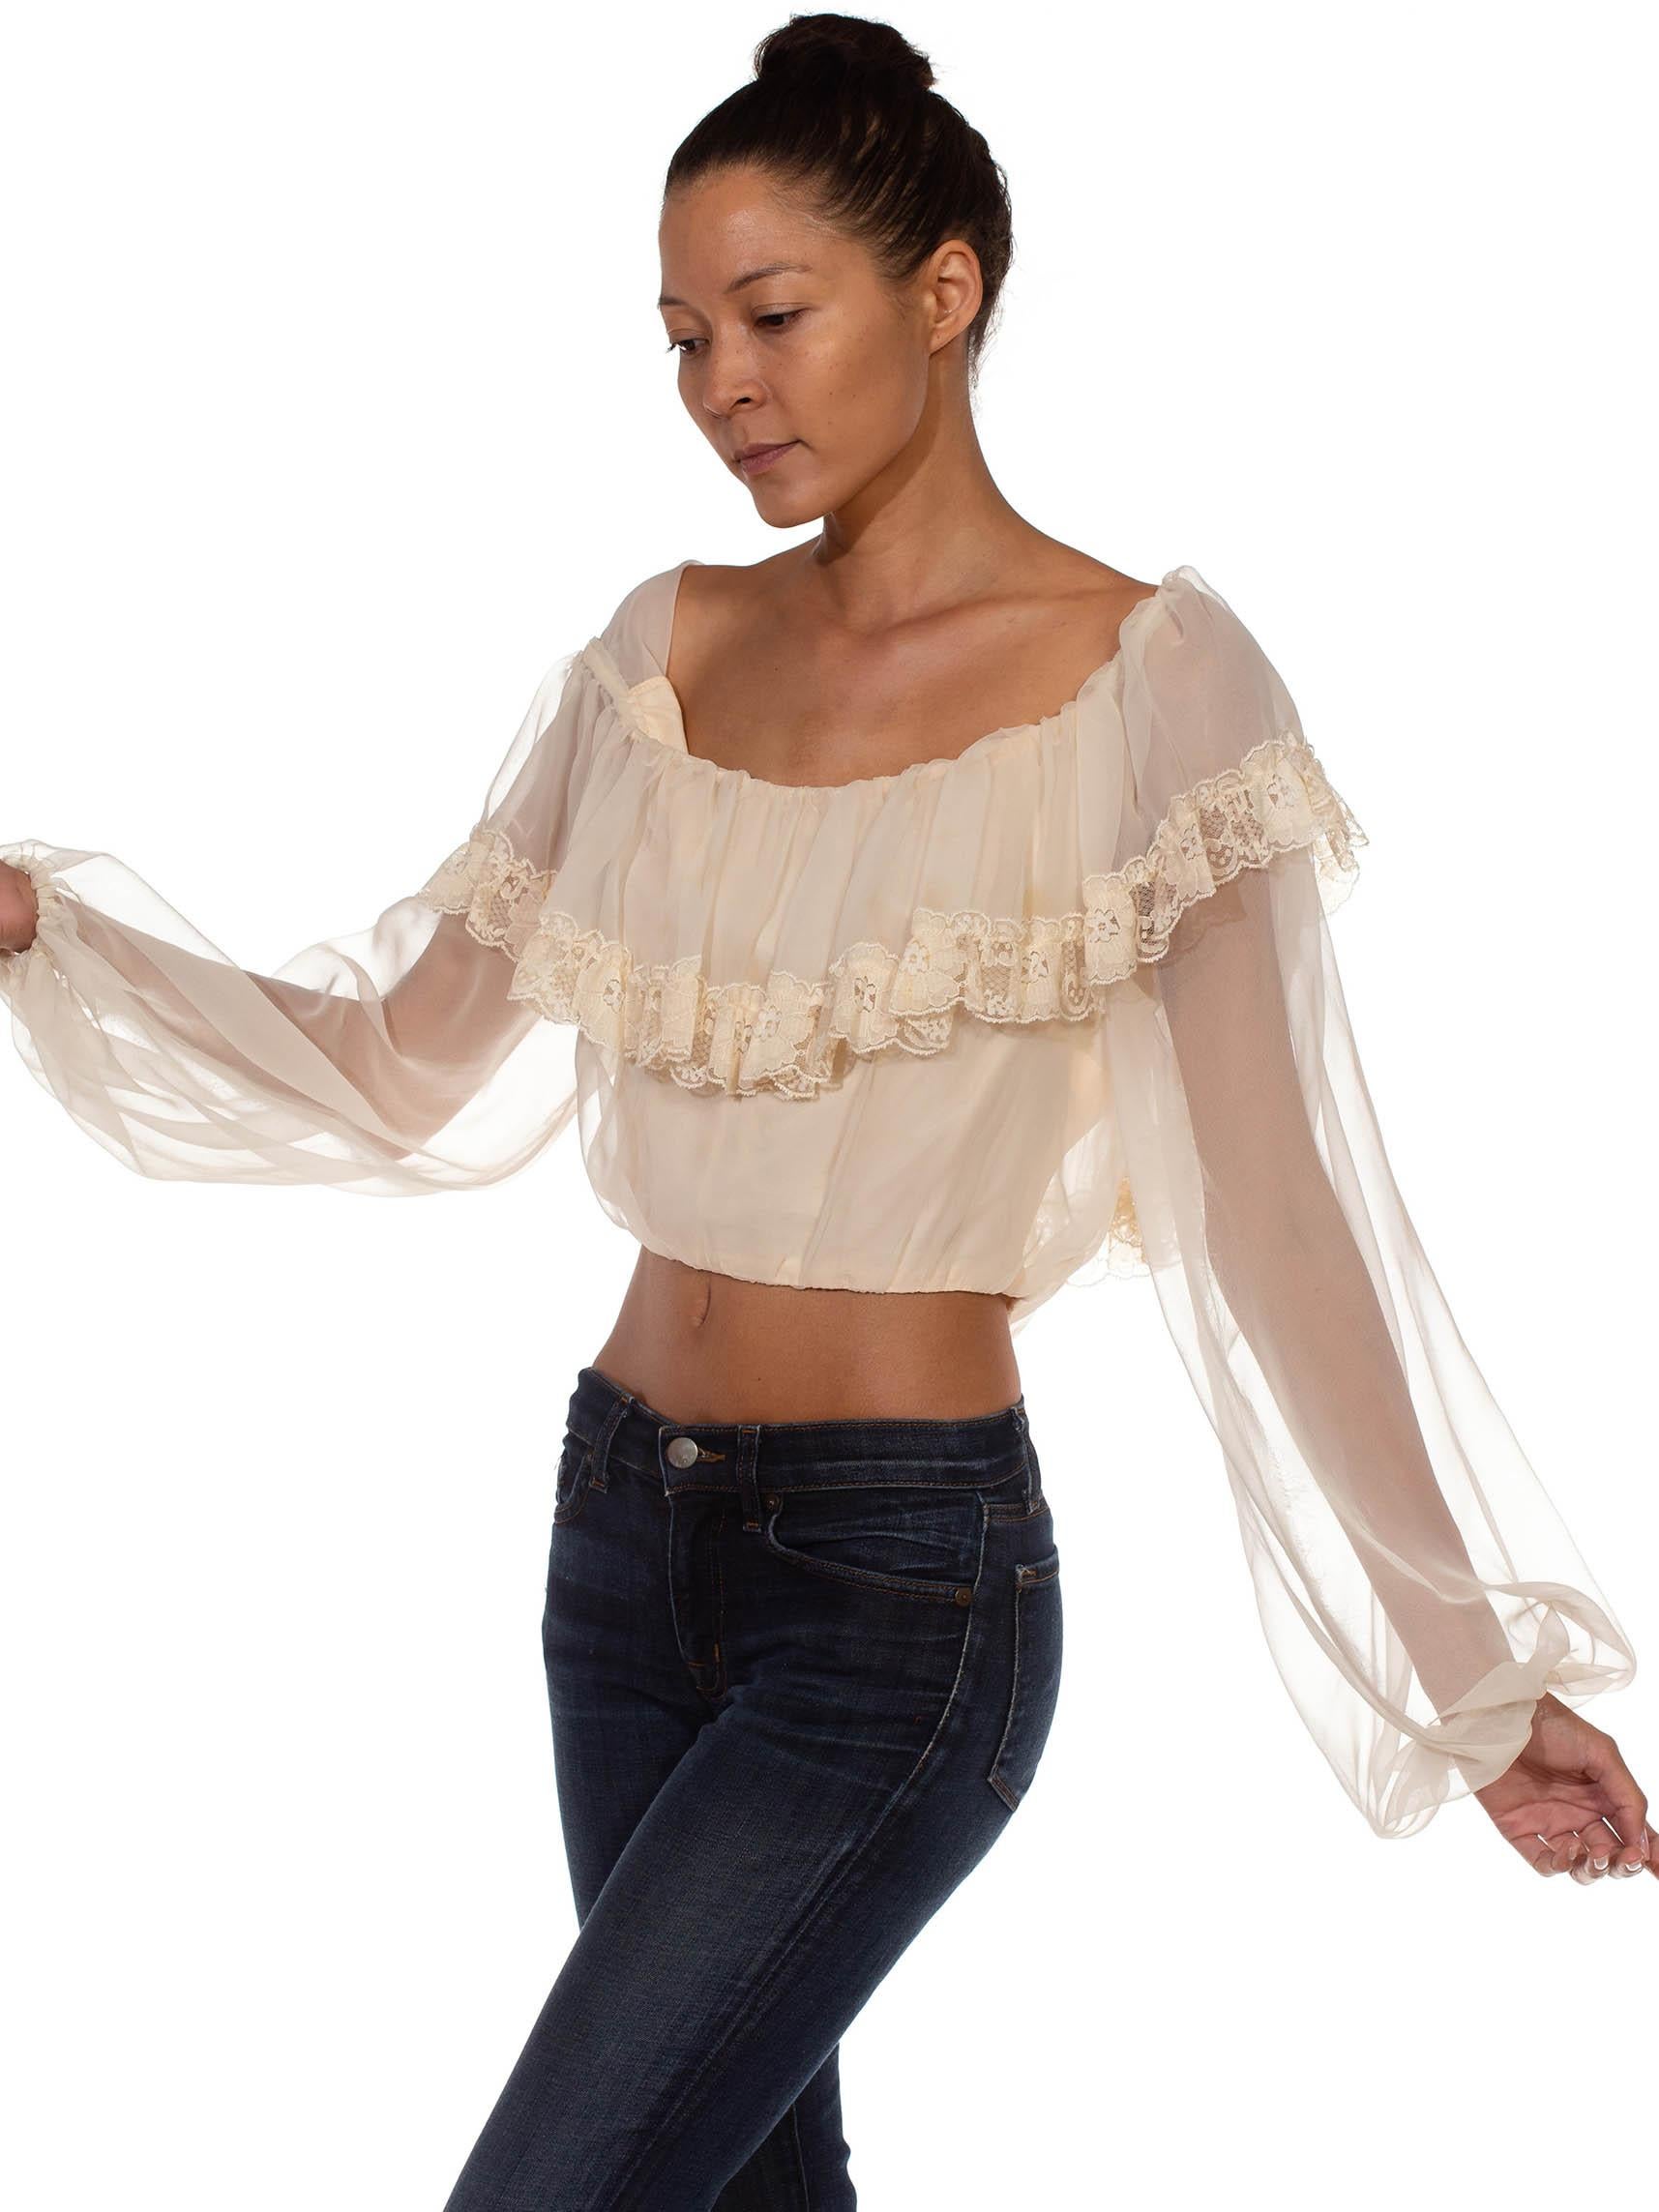 Women's 1970S Cream Polyester Chiffon Caplet With Lace Trimmings Crop Top For Sale